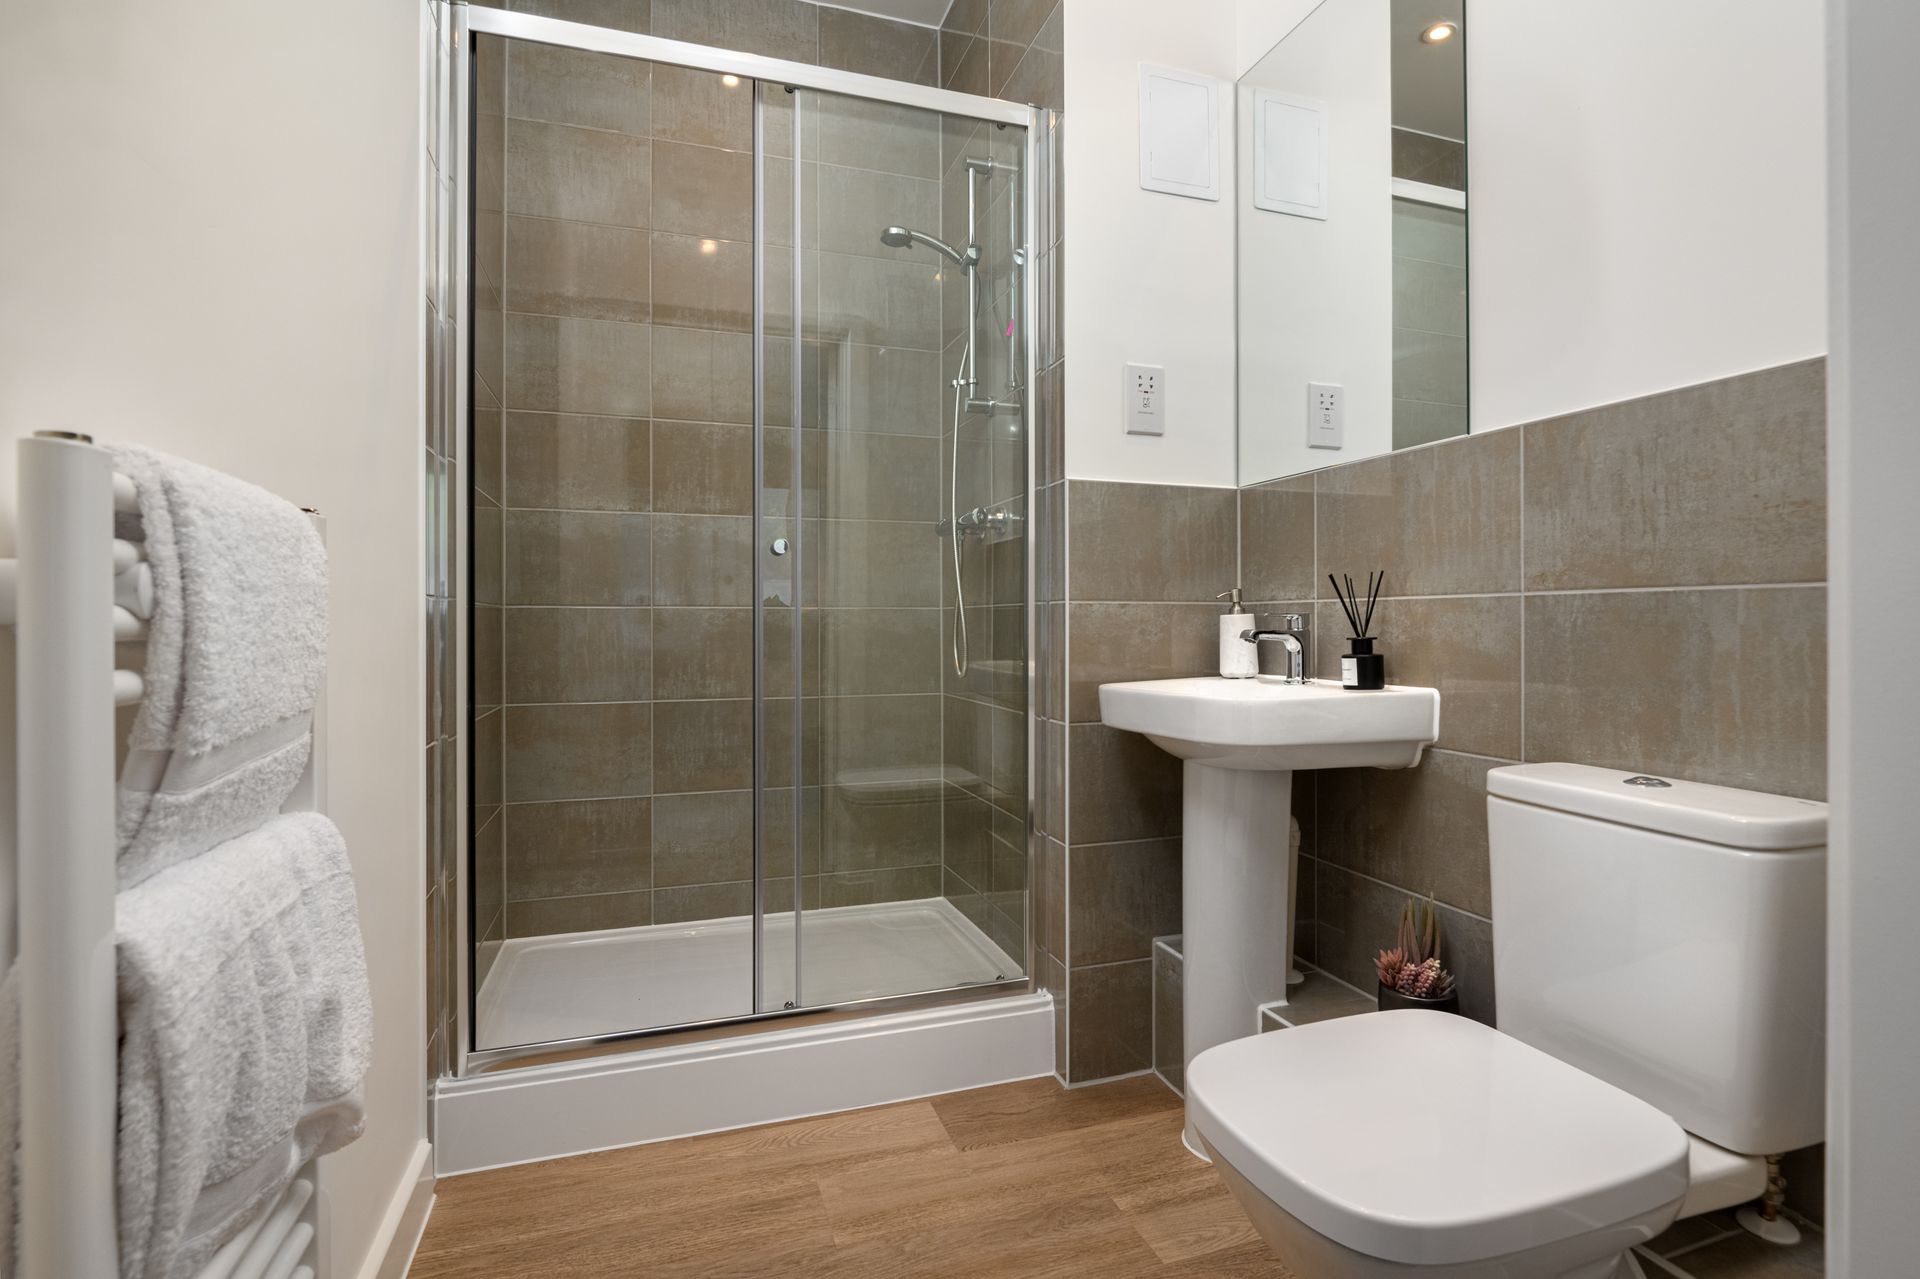 A bathroom with a toilet , sink , shower and mirror at Walton Court.